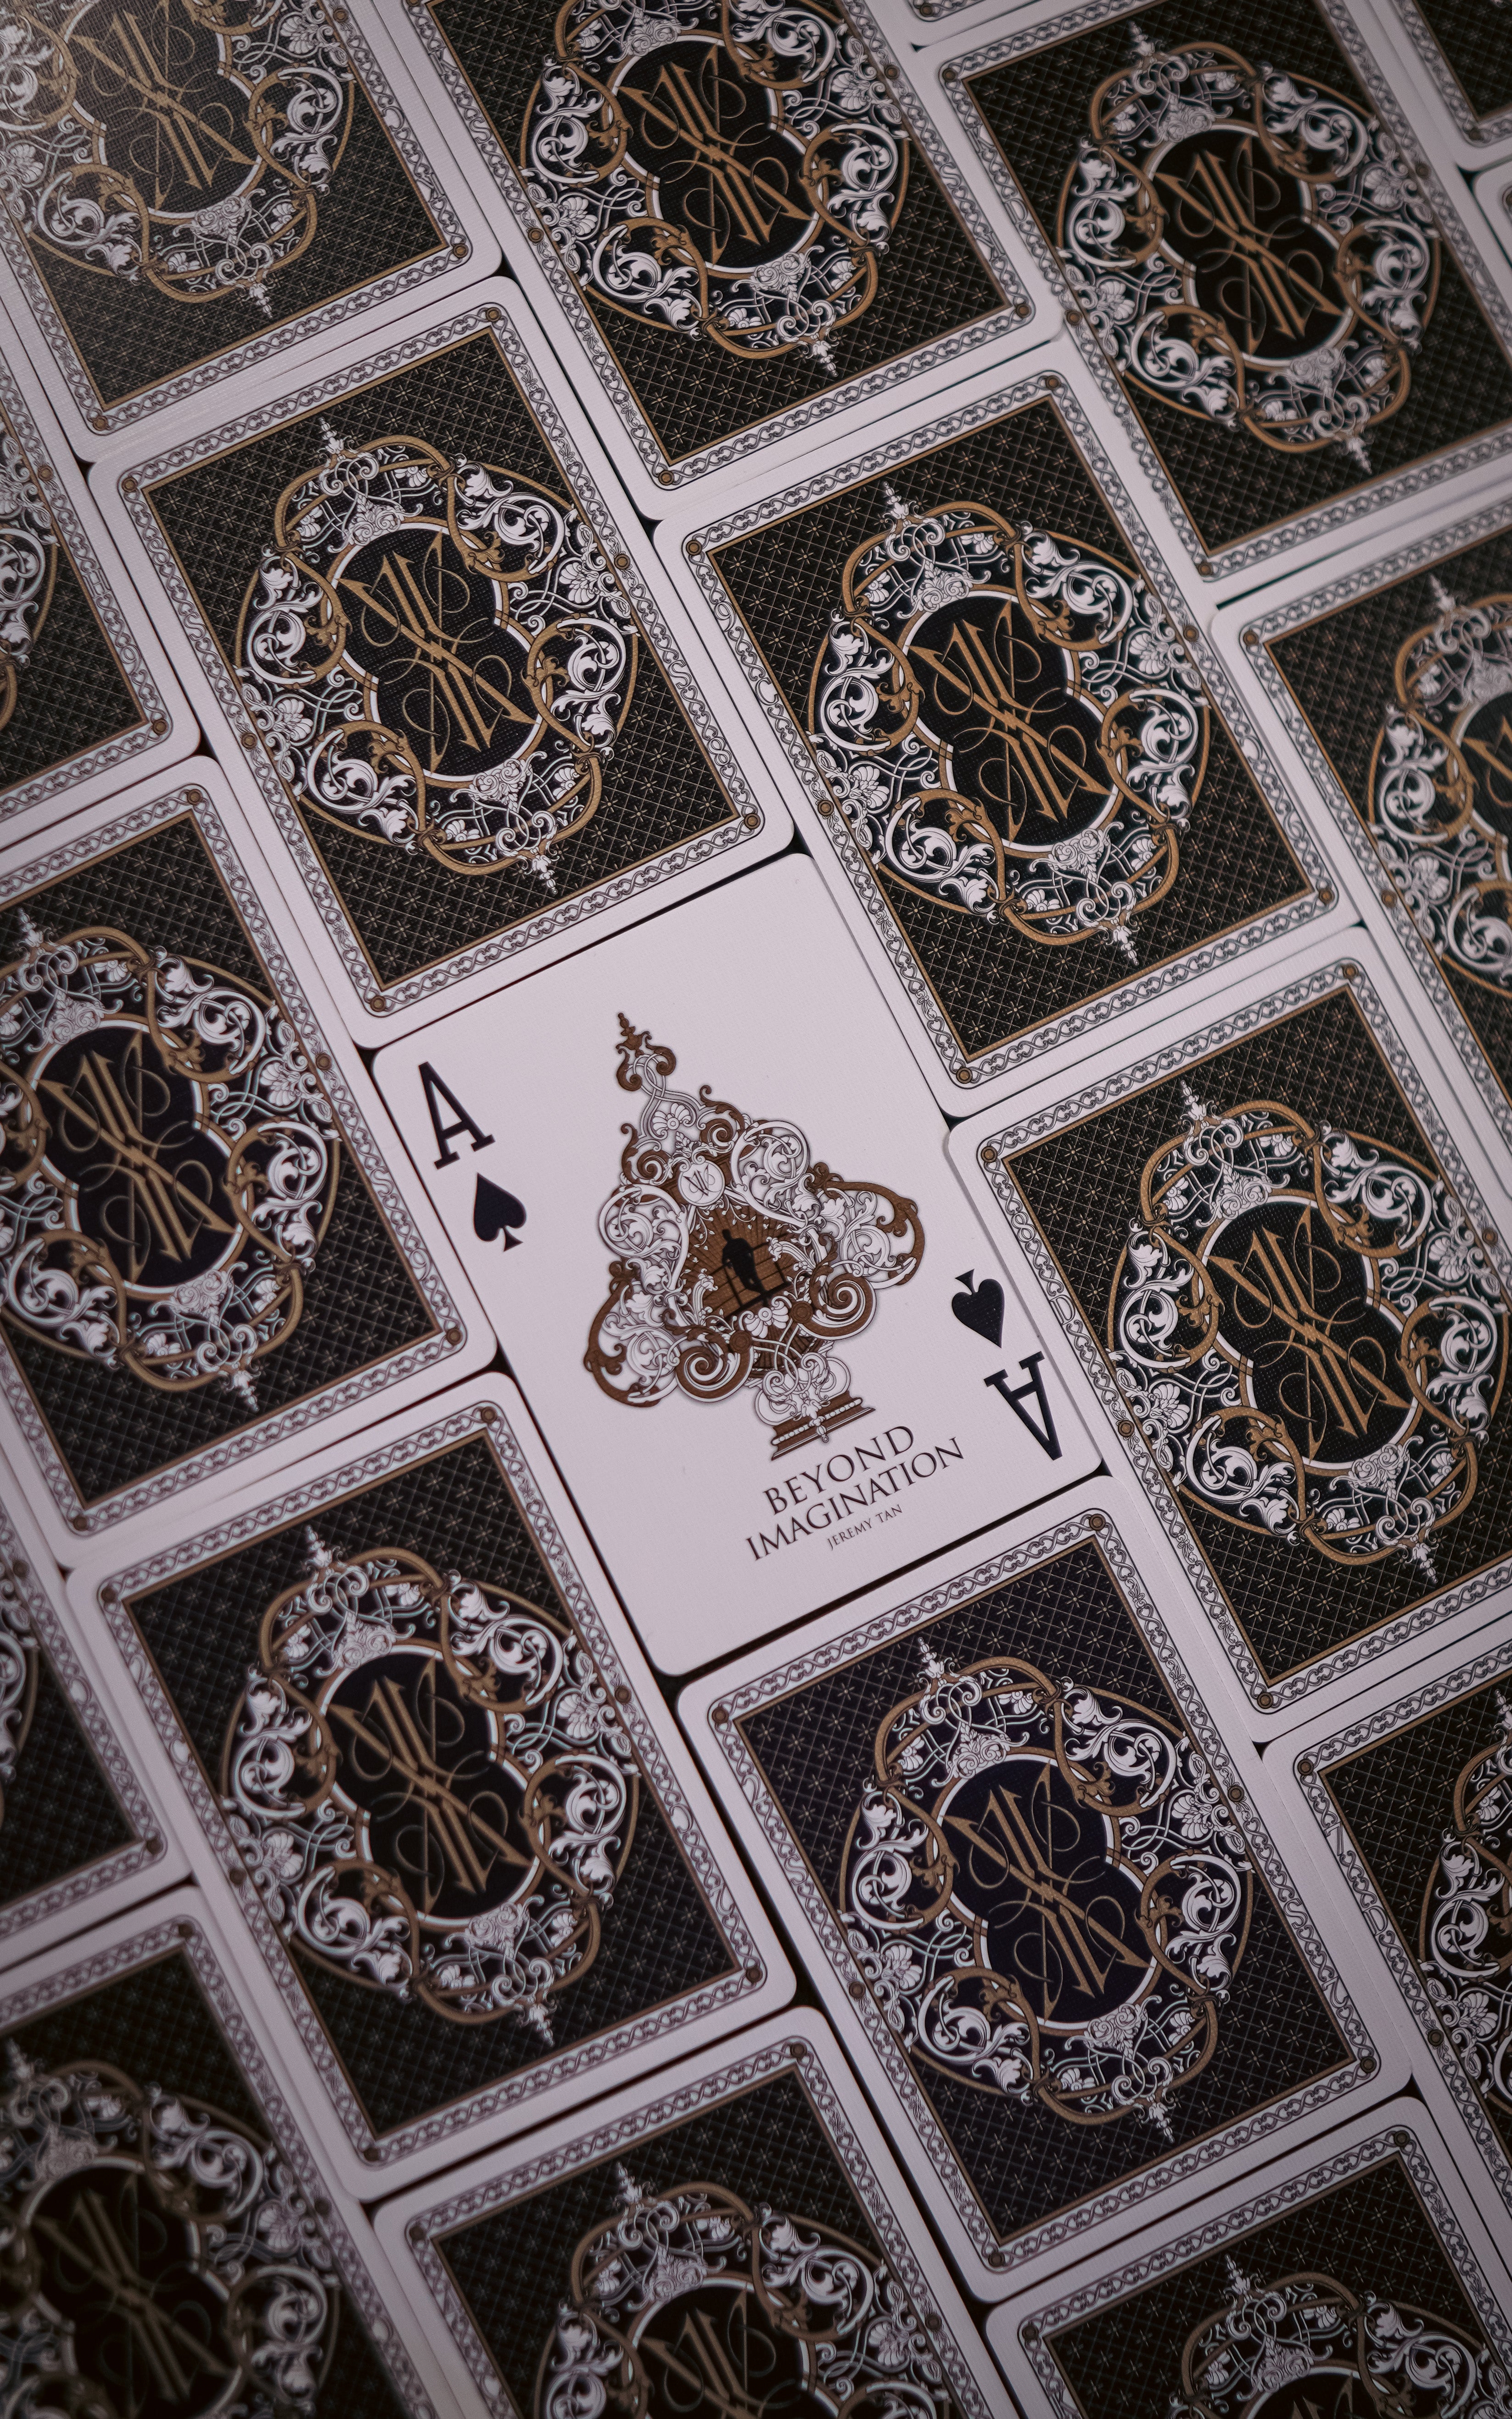 BEYOND IMAGINATION Playing Cards by Jeremy Tan